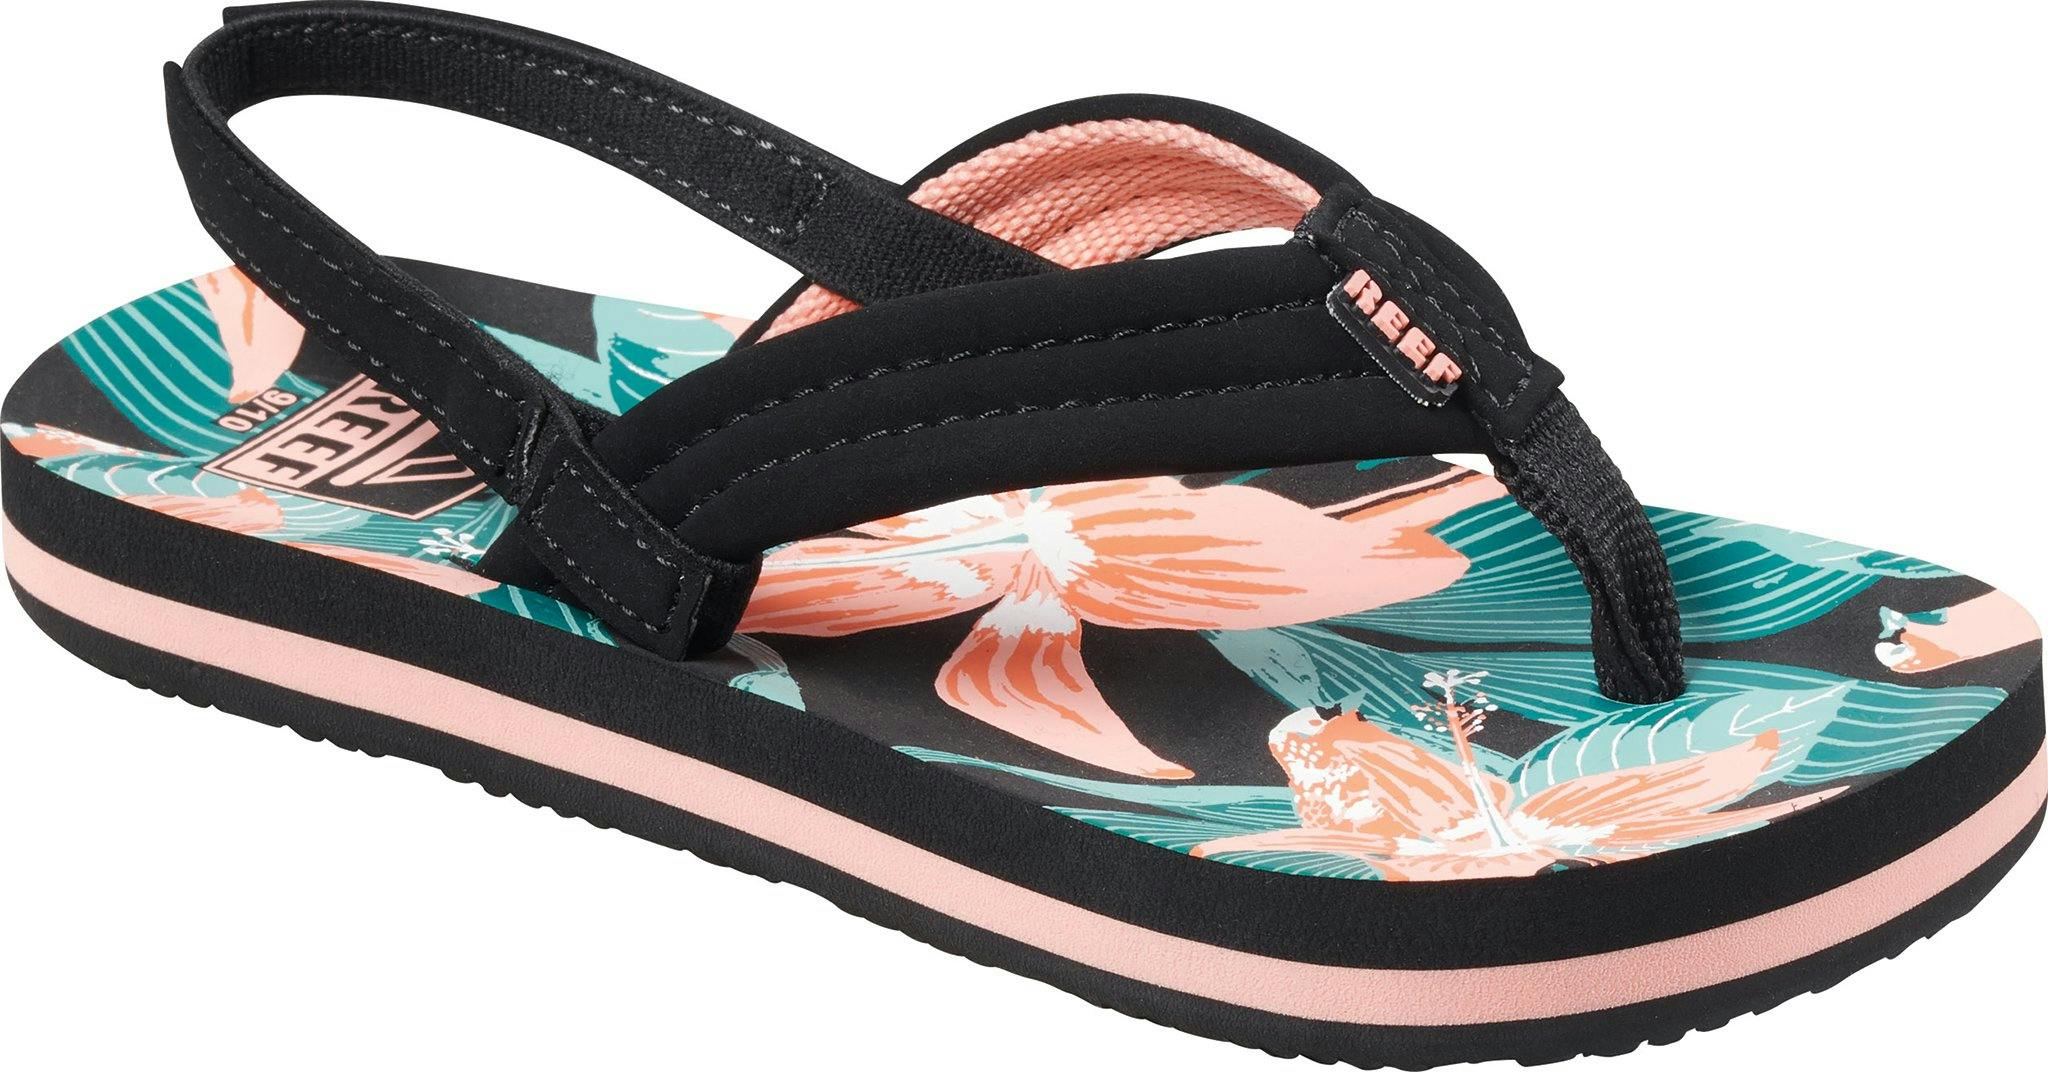 Product image for Ahi Sandals - Kids